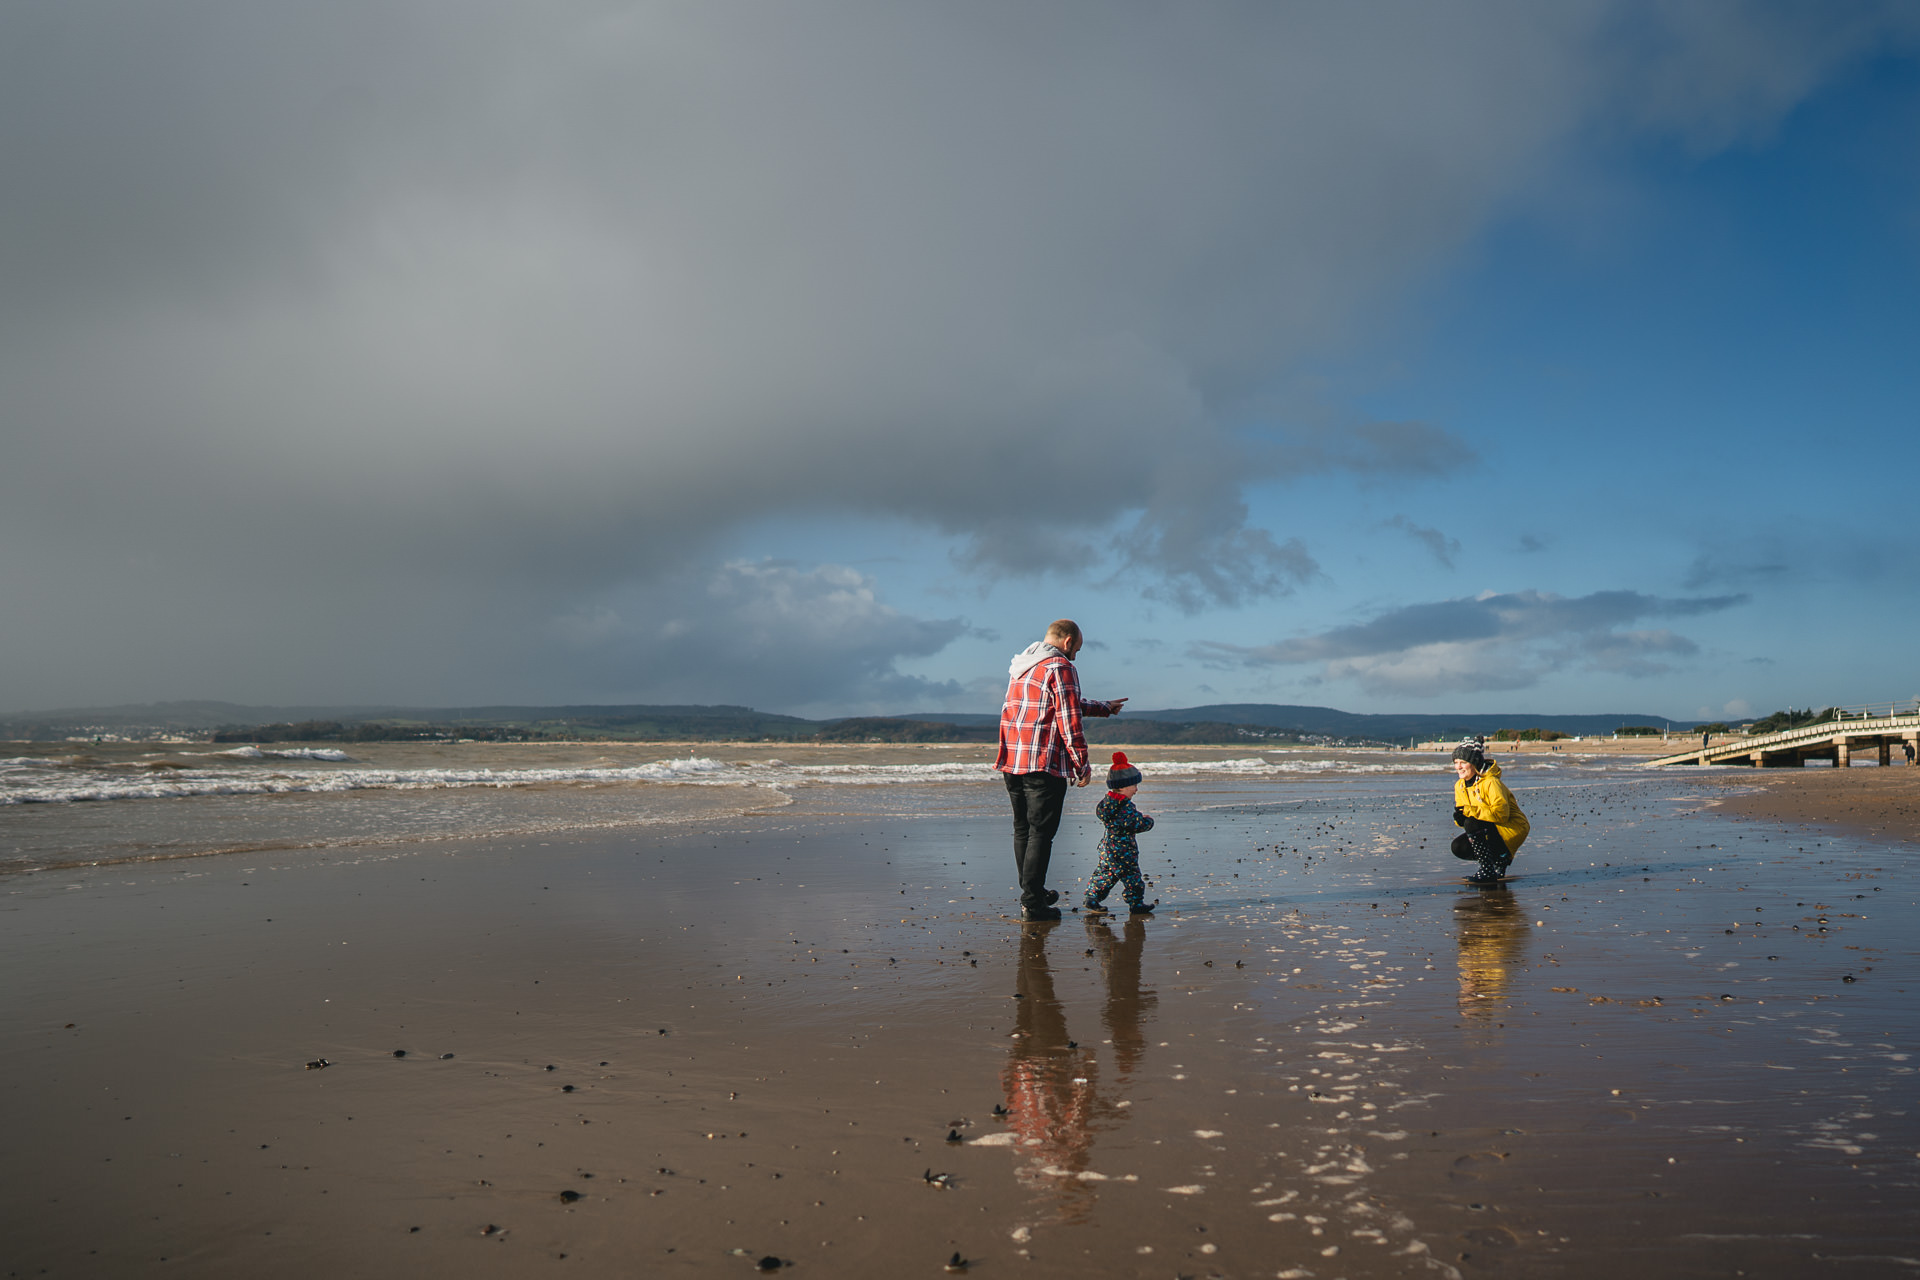 A young child walking between two parents on a beach